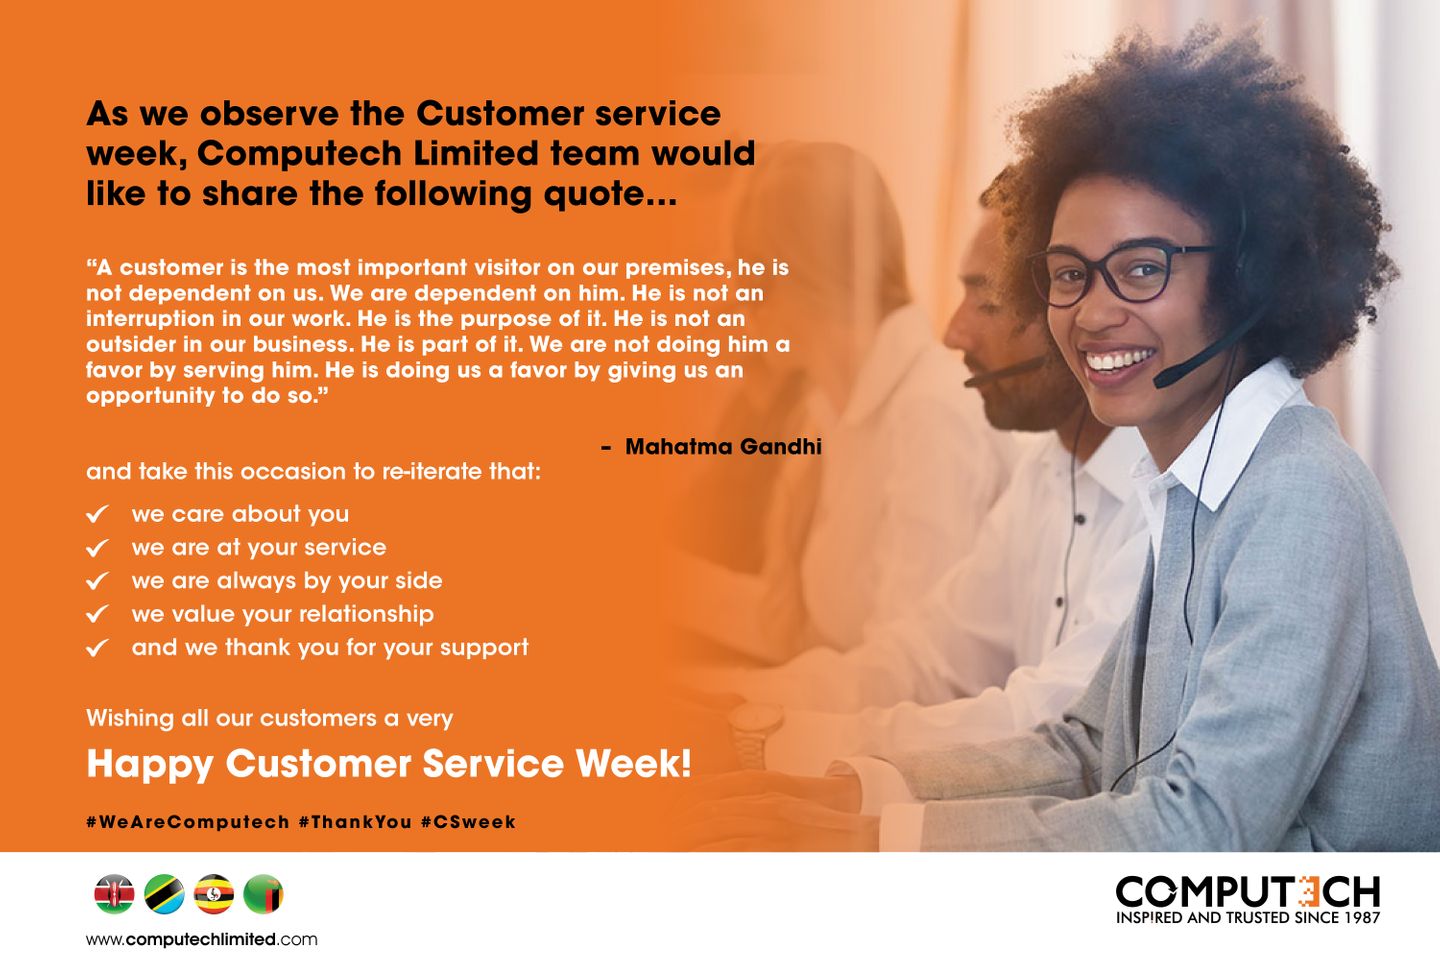 Every day at Computech is customer service week, because you are our number one priority.